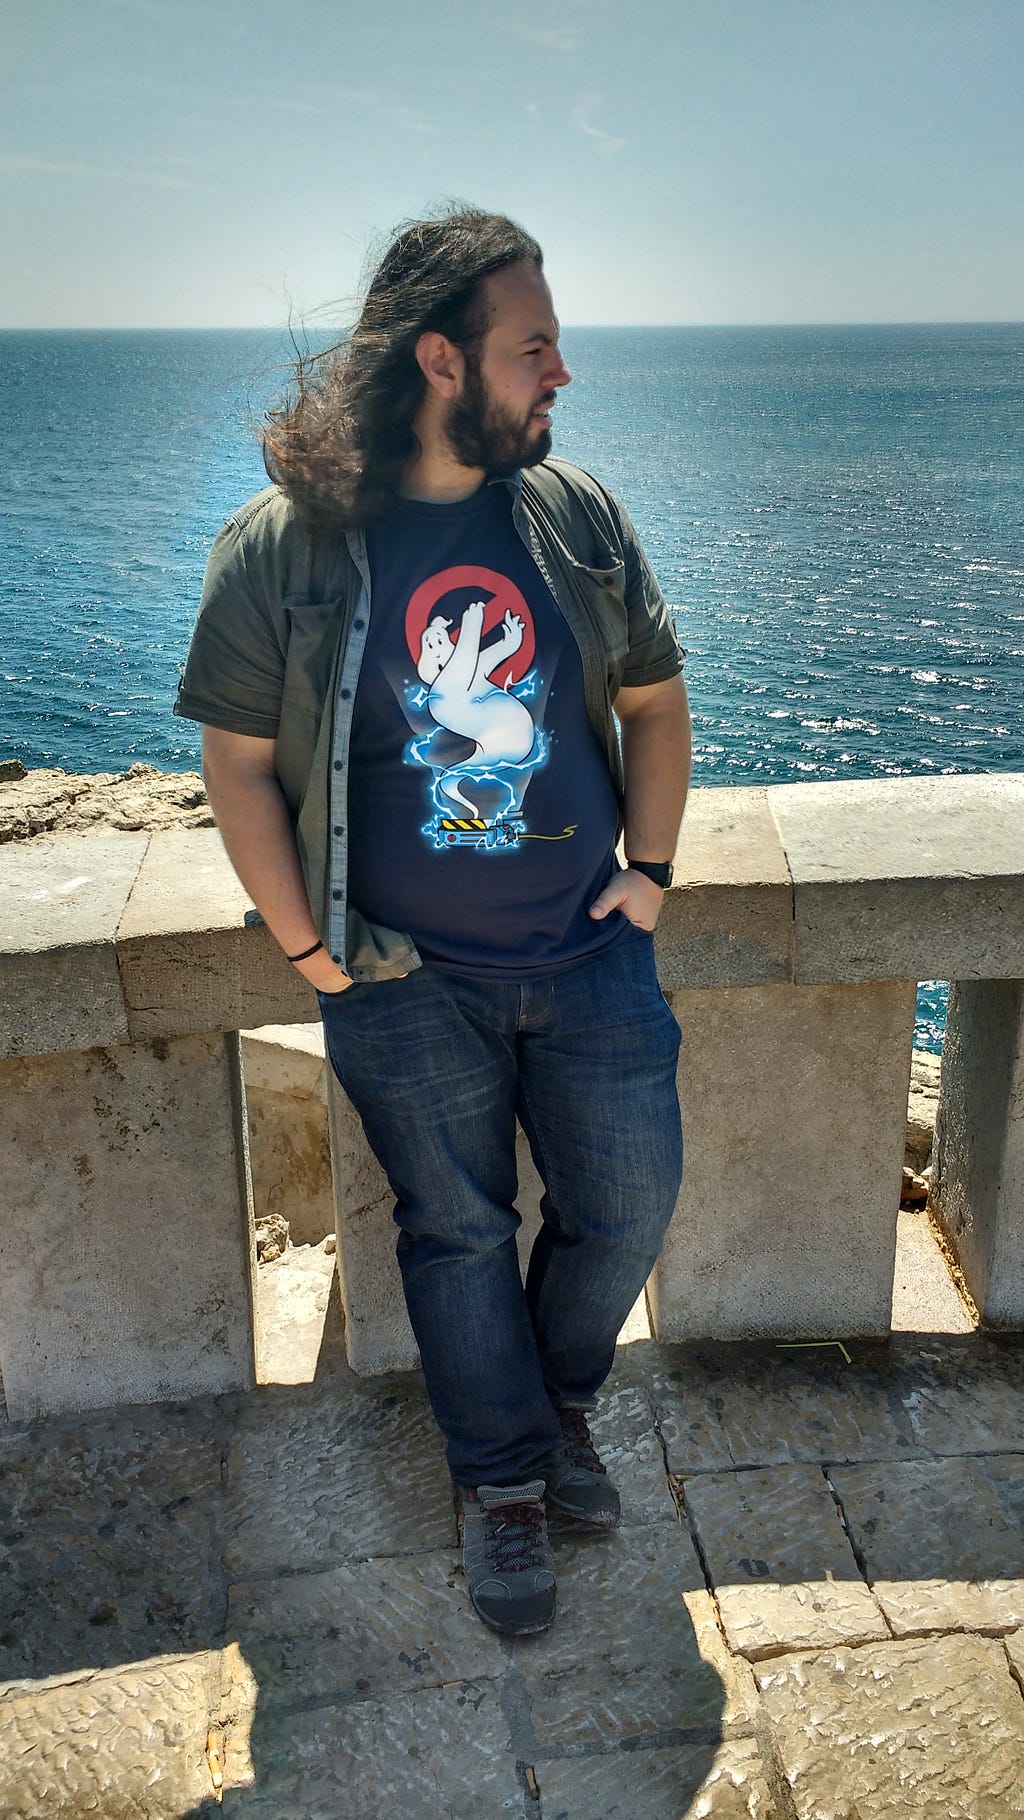 A man wearing a ghostbusters shirt stands in front of blue water.